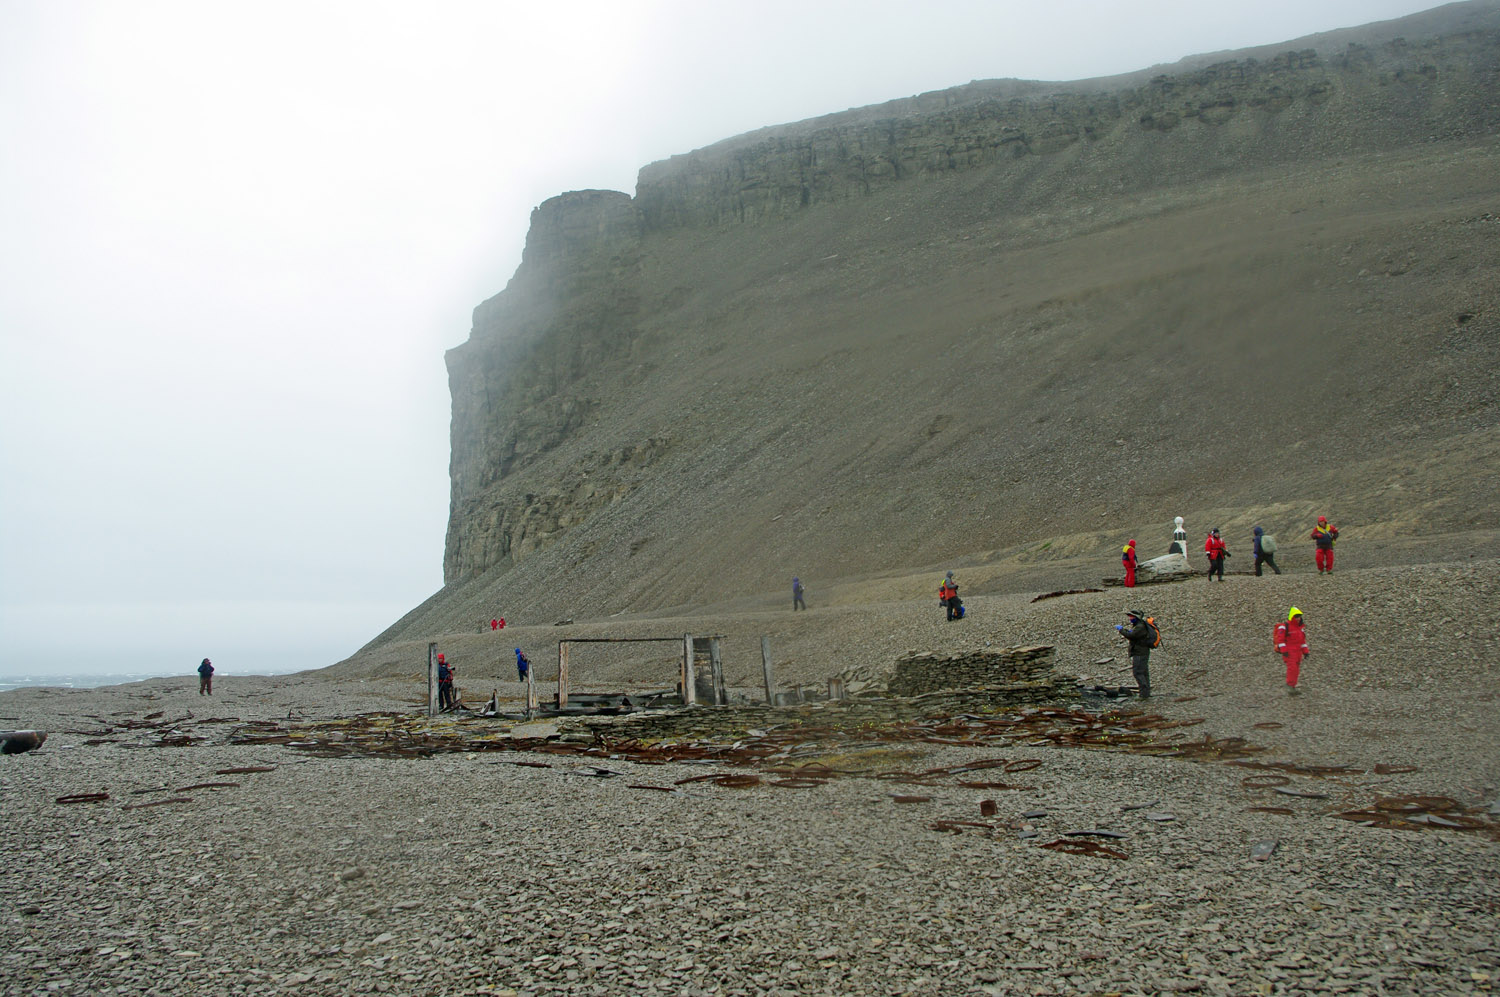 The Remains of Northumberland House Beechey Island Showing the Memorial and Cliff Behind